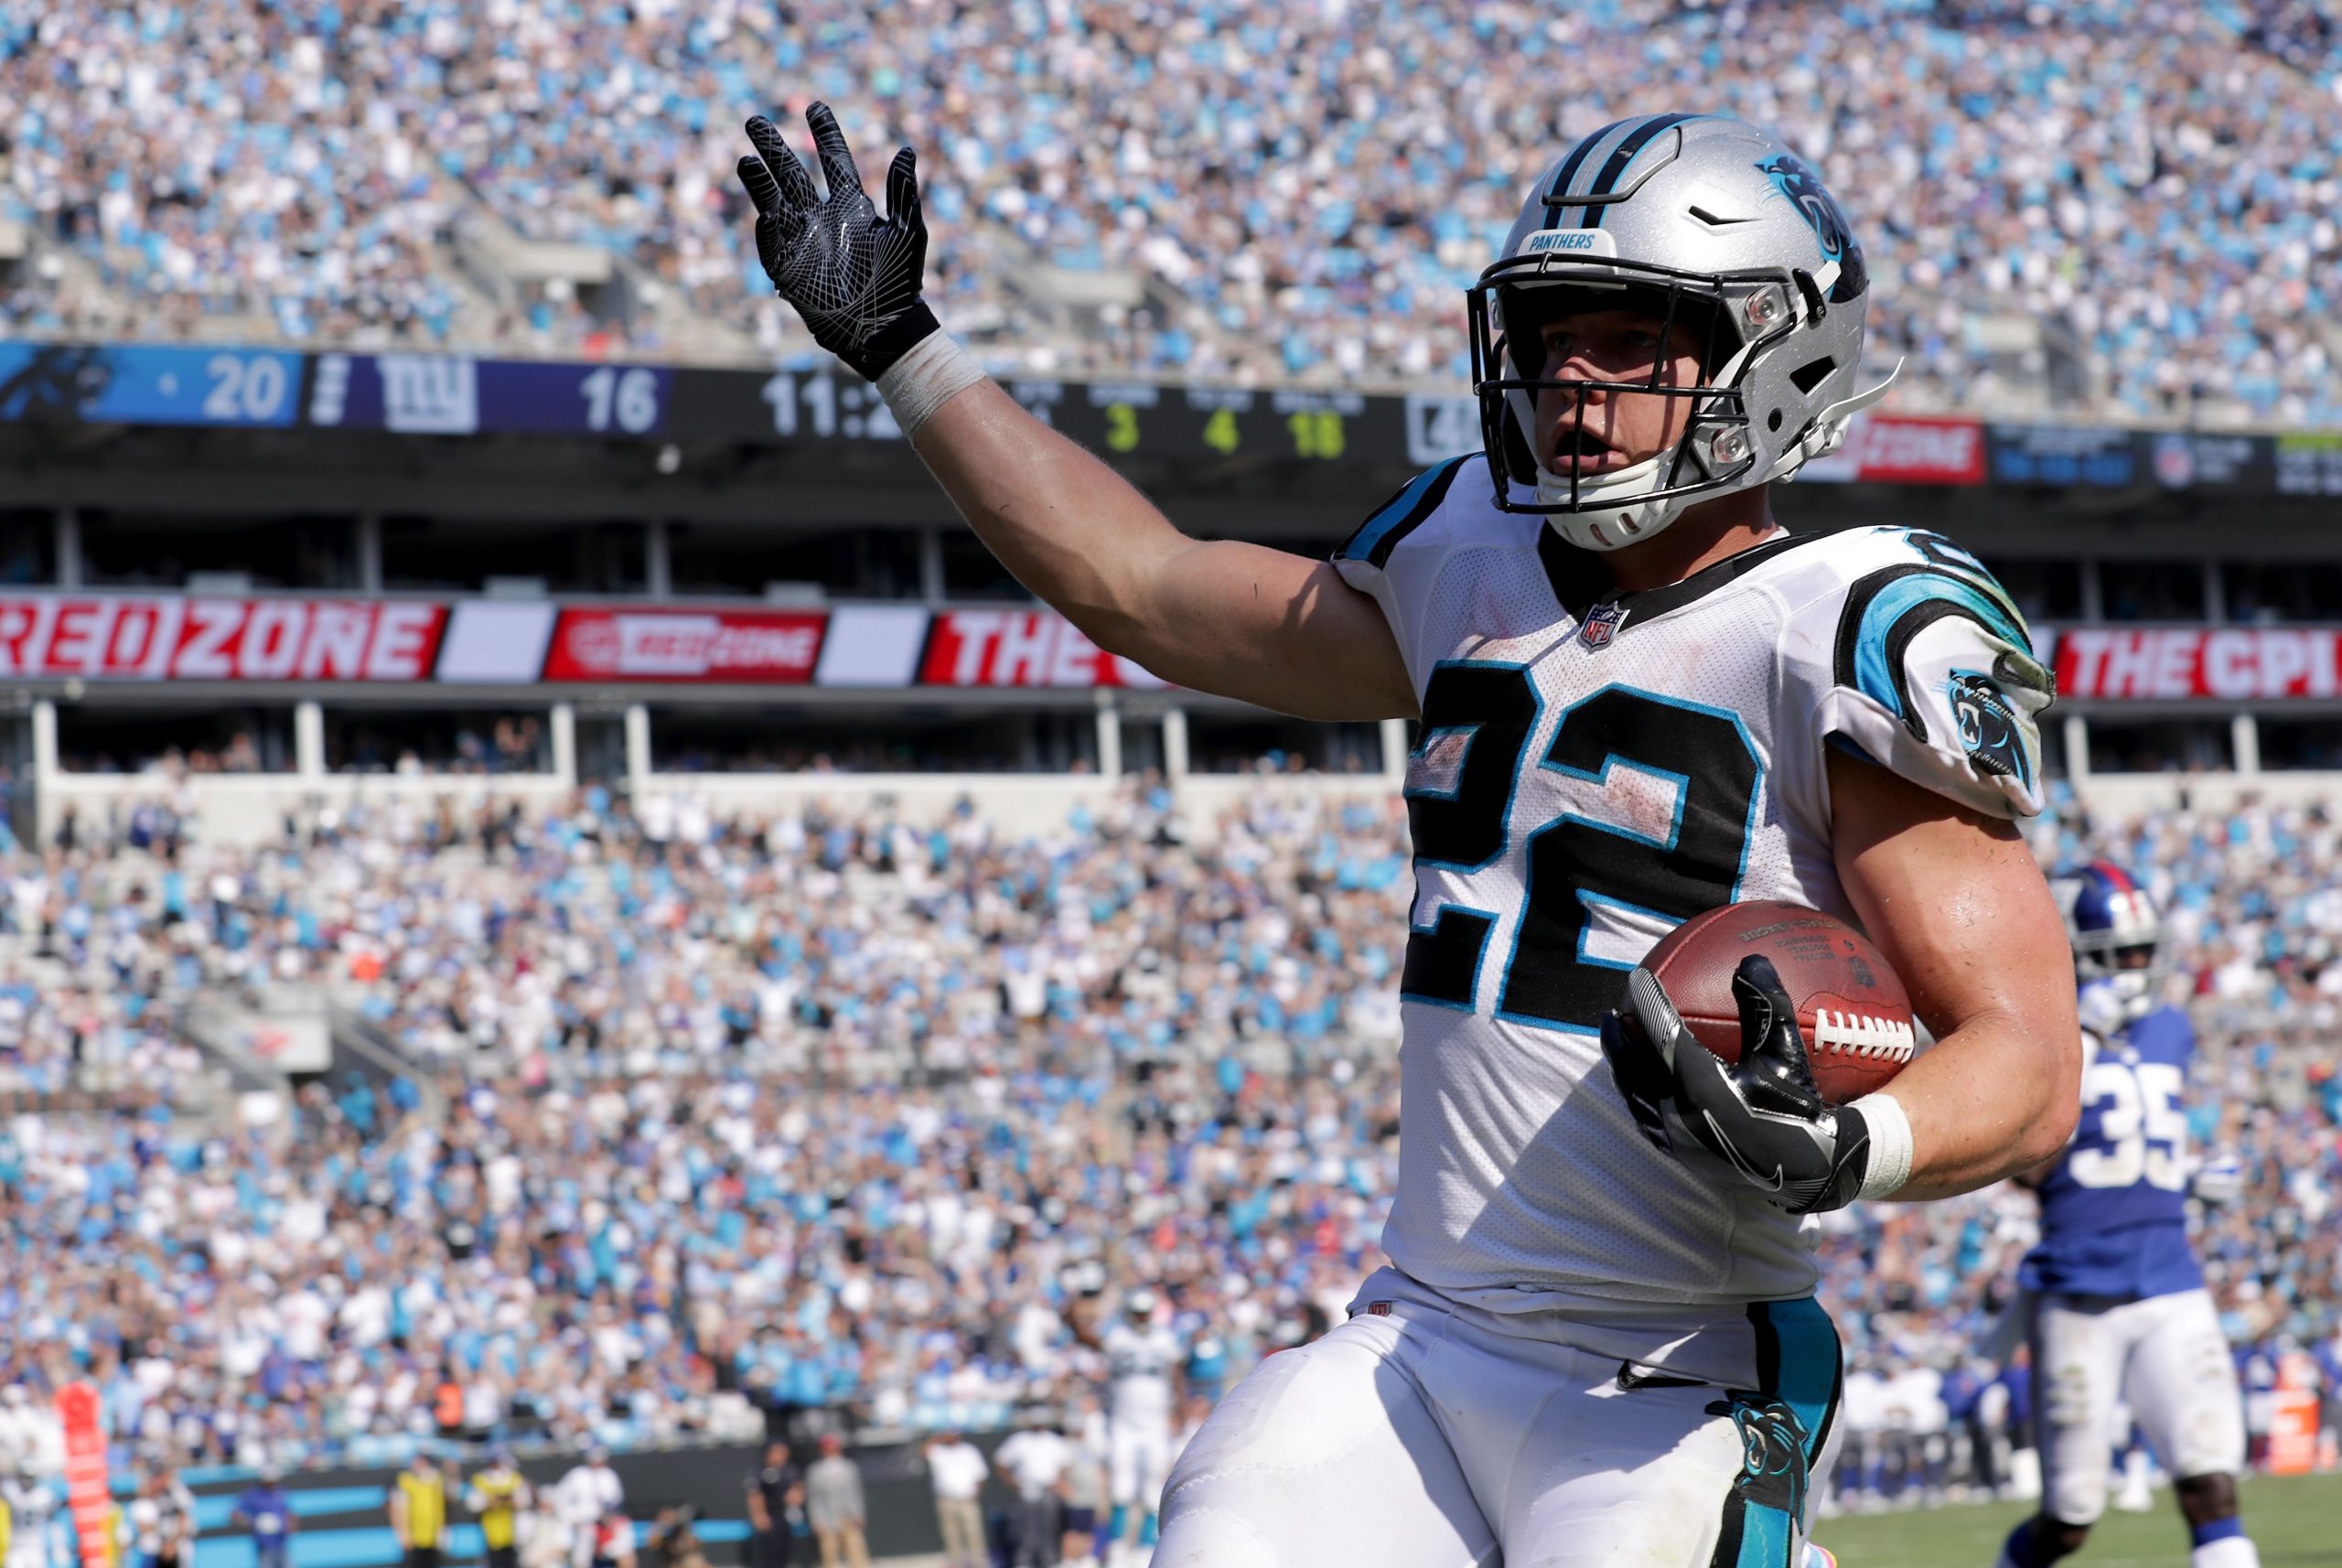 Christian McCaffrey #22 of the Carolina Panthers scores a touchdown against the New York Giants in ...